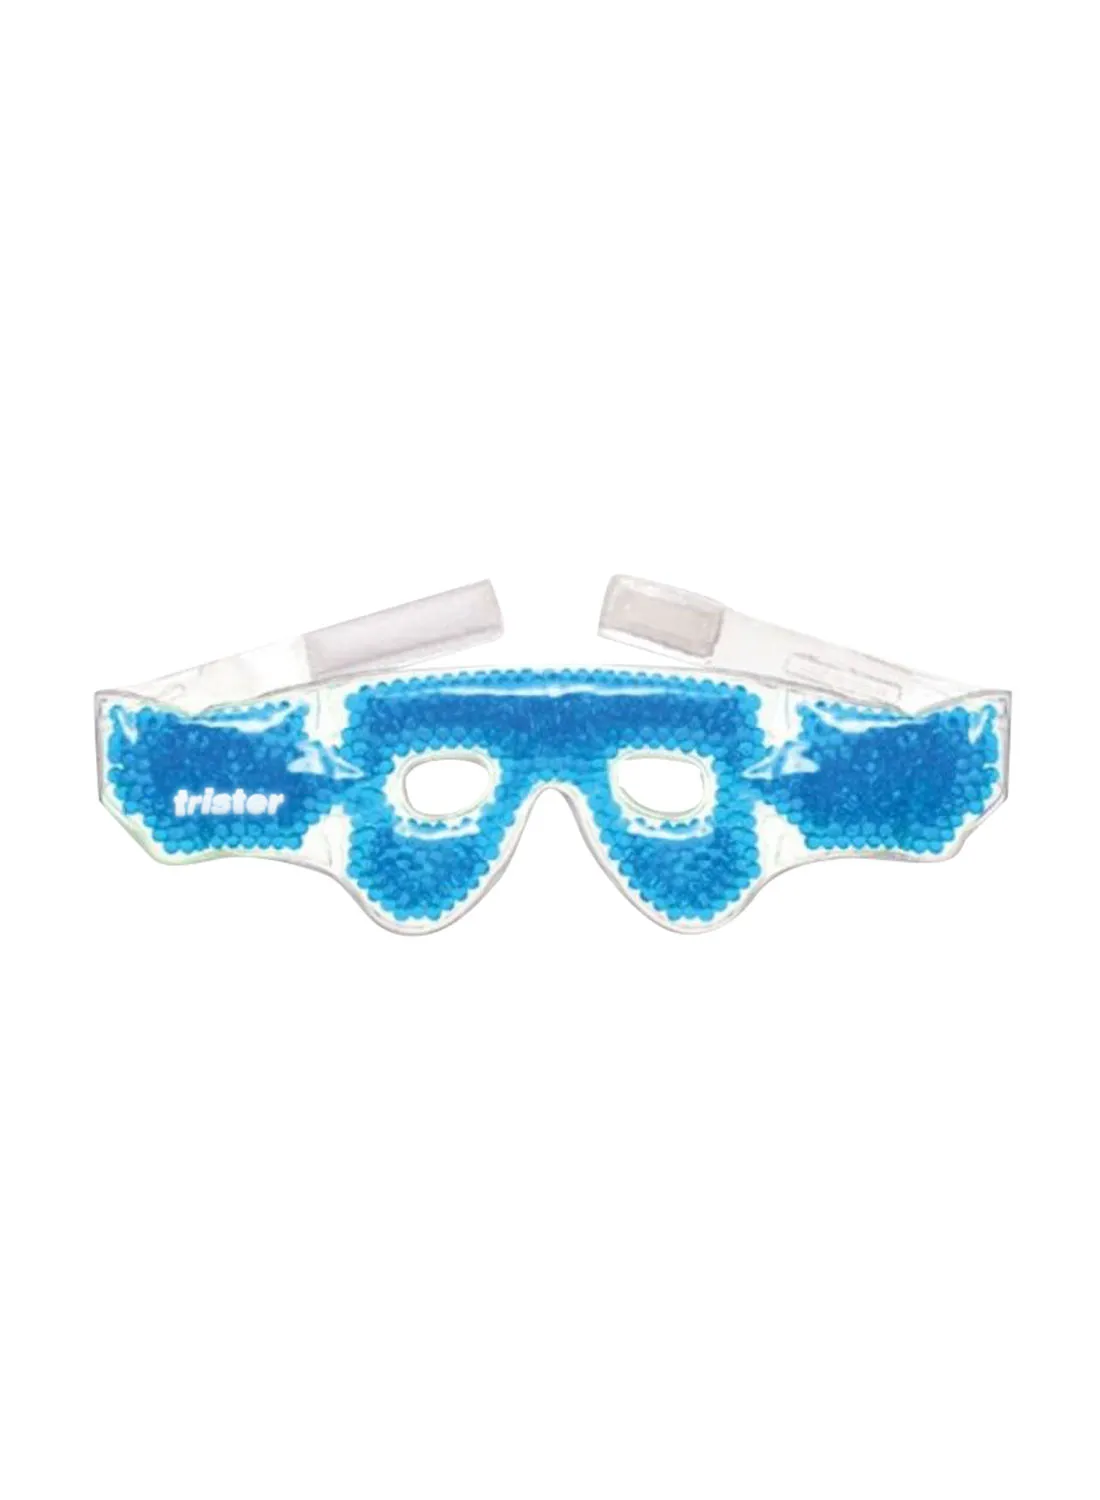 trister Beads Cold / Hot Pack Eye Mask Medium:Ts-599Hcb-Ey-M